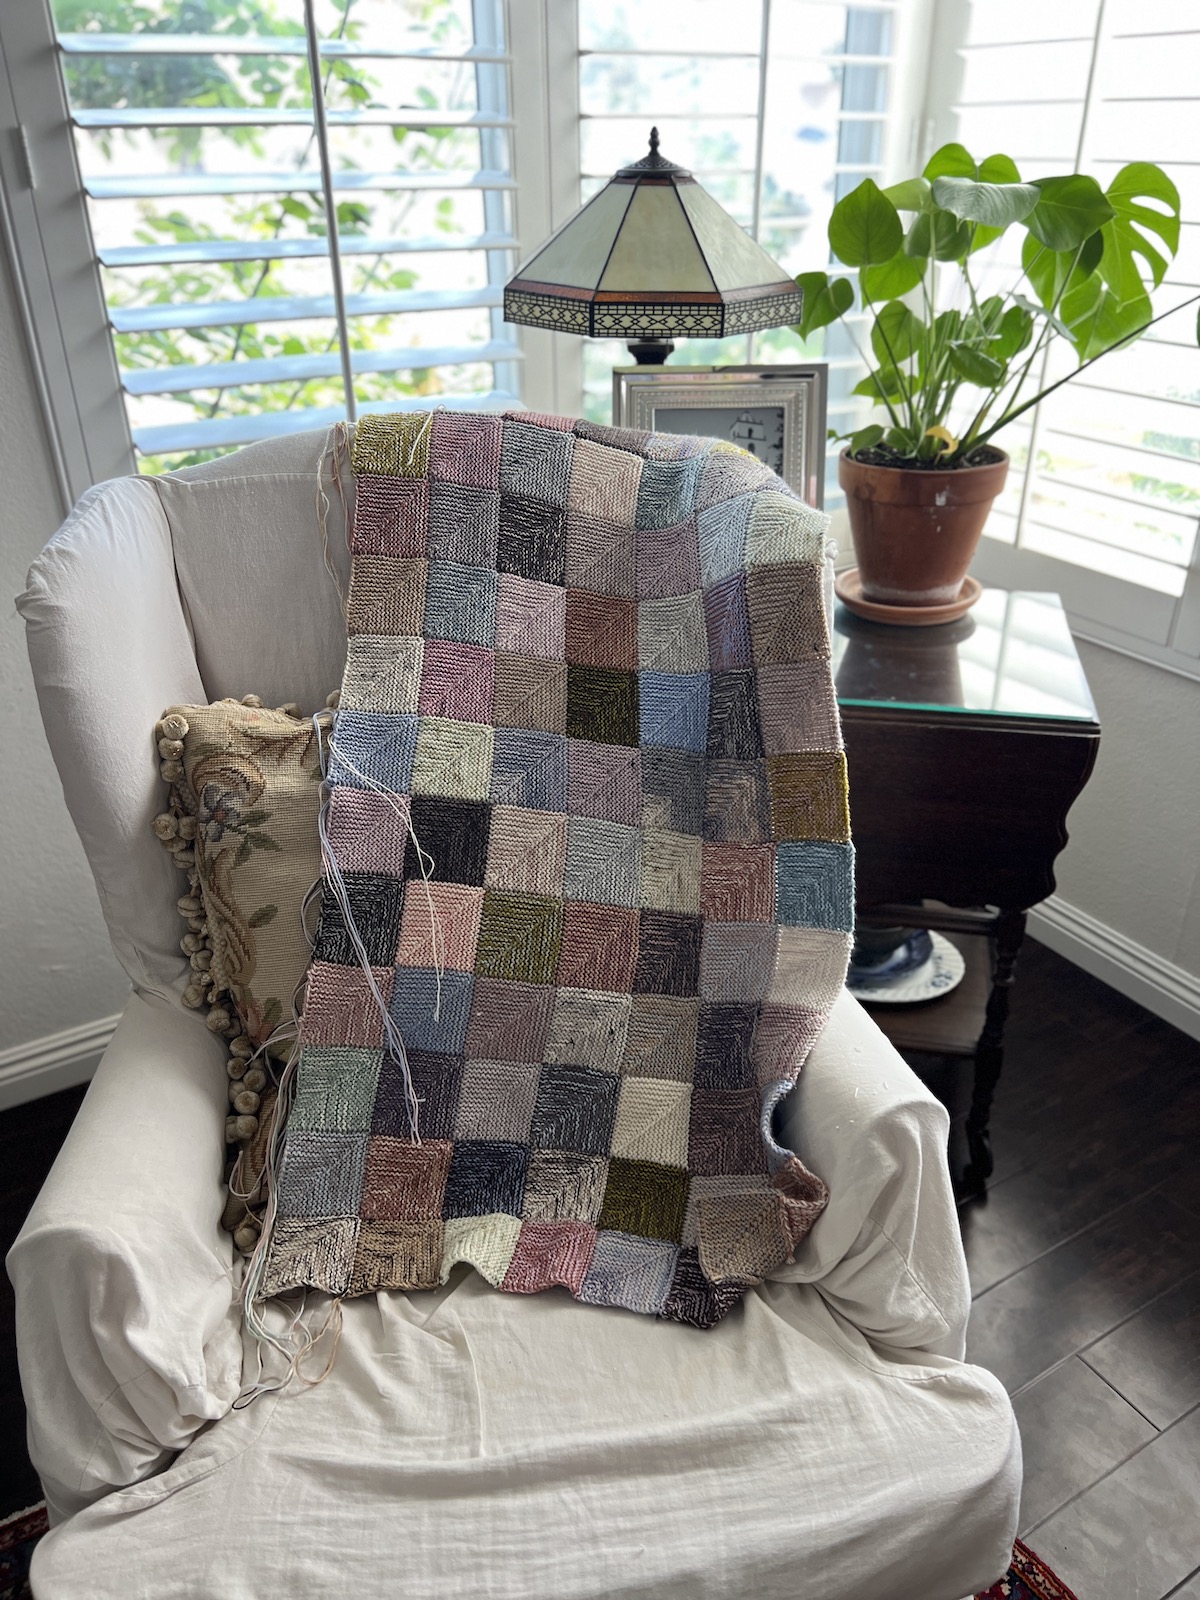 A multicolored mitered square blanket in progress is draped across the back of a slipcovered arm chair. In the background are a potted plant, a lamp, a picture frame, and some windows.